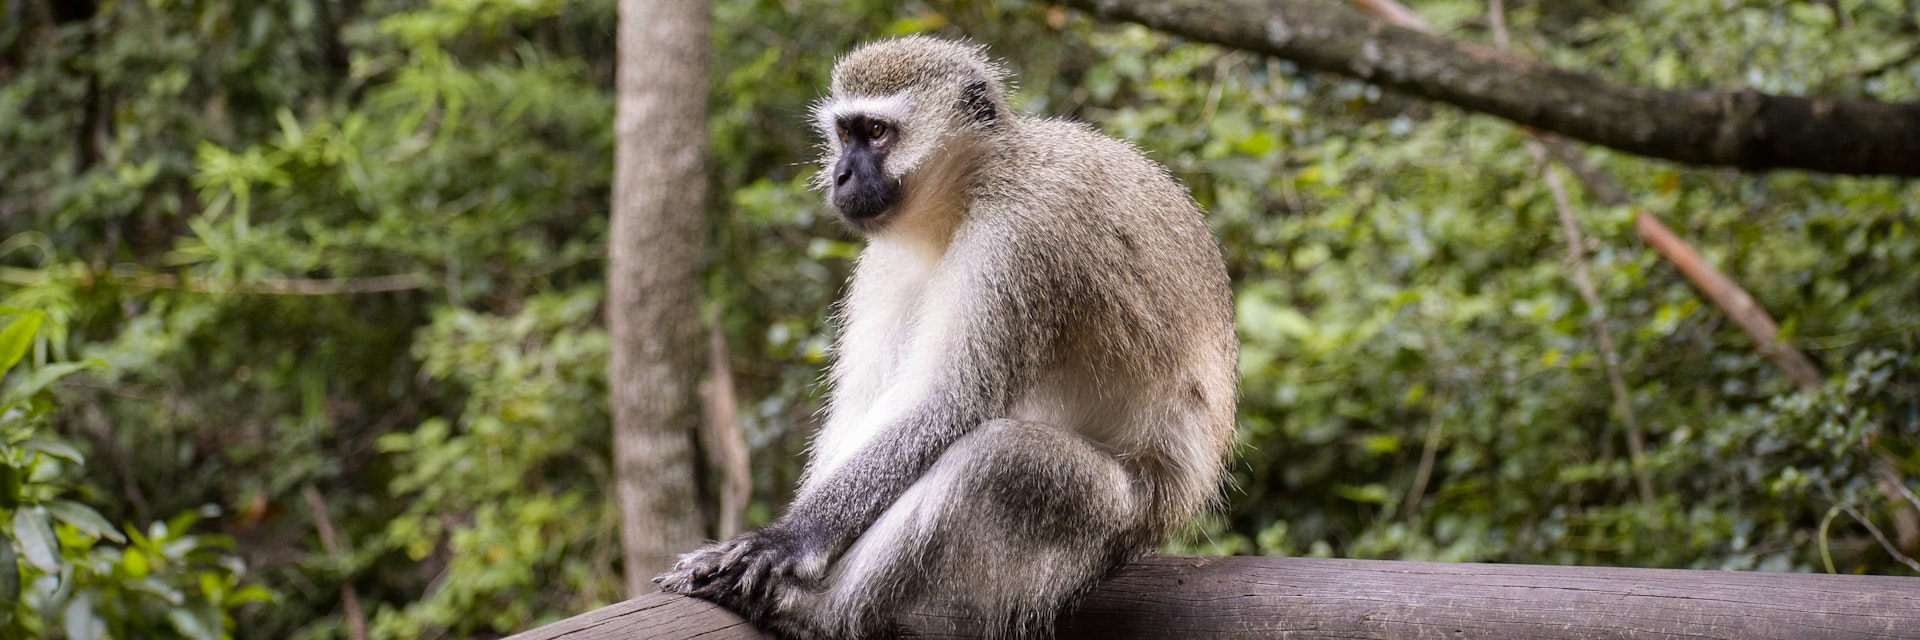 A gibbon sitting on a wooden fence in Monkeyland, Plettenberg Bay, South Africa.